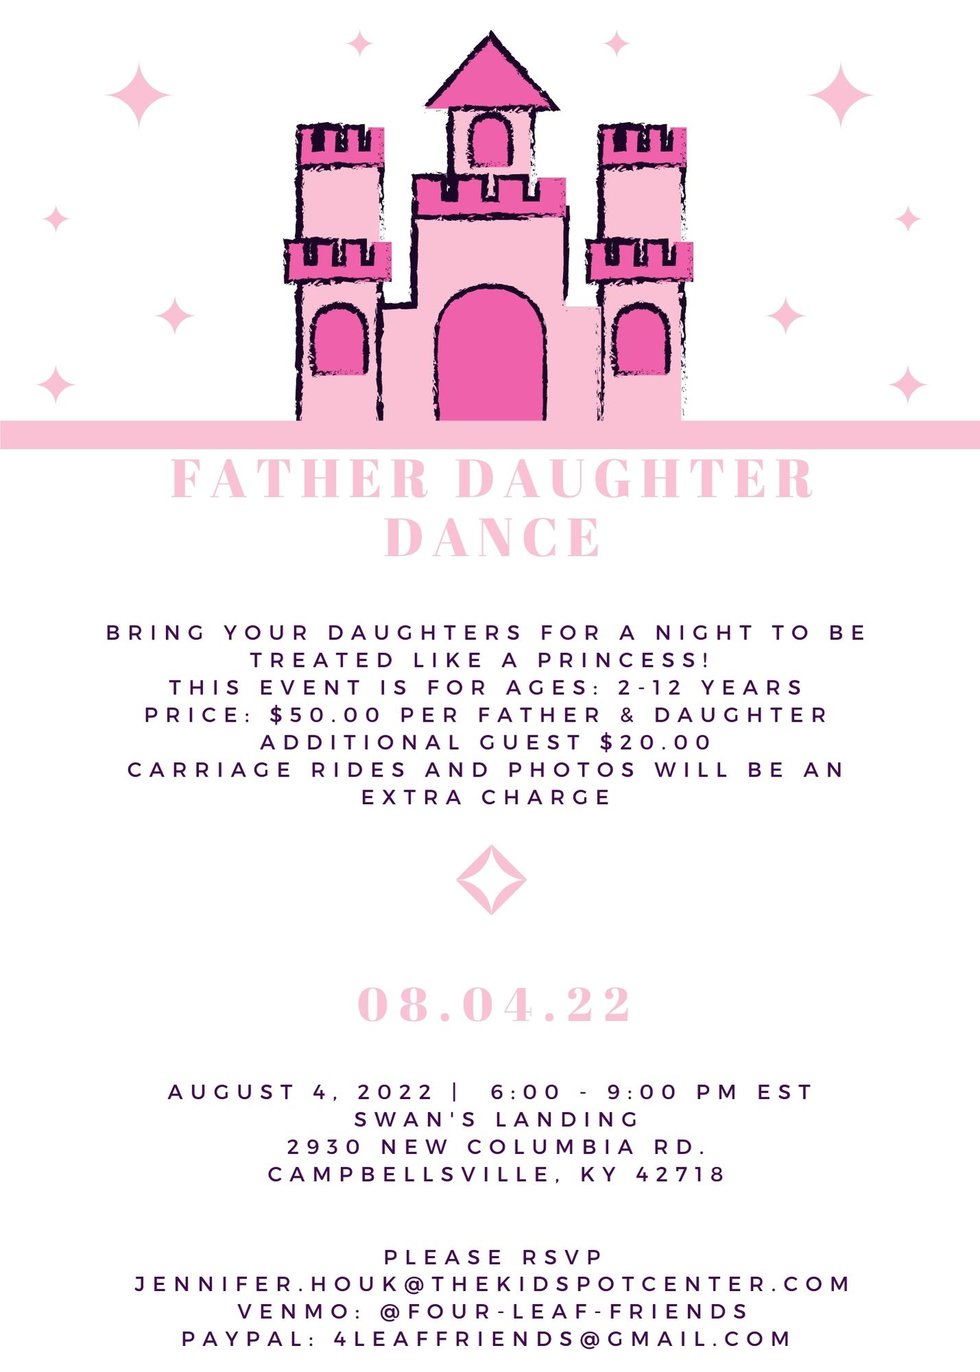 Violet and Pink Castle and Stars Princess Baby Shower Invitation.jpg